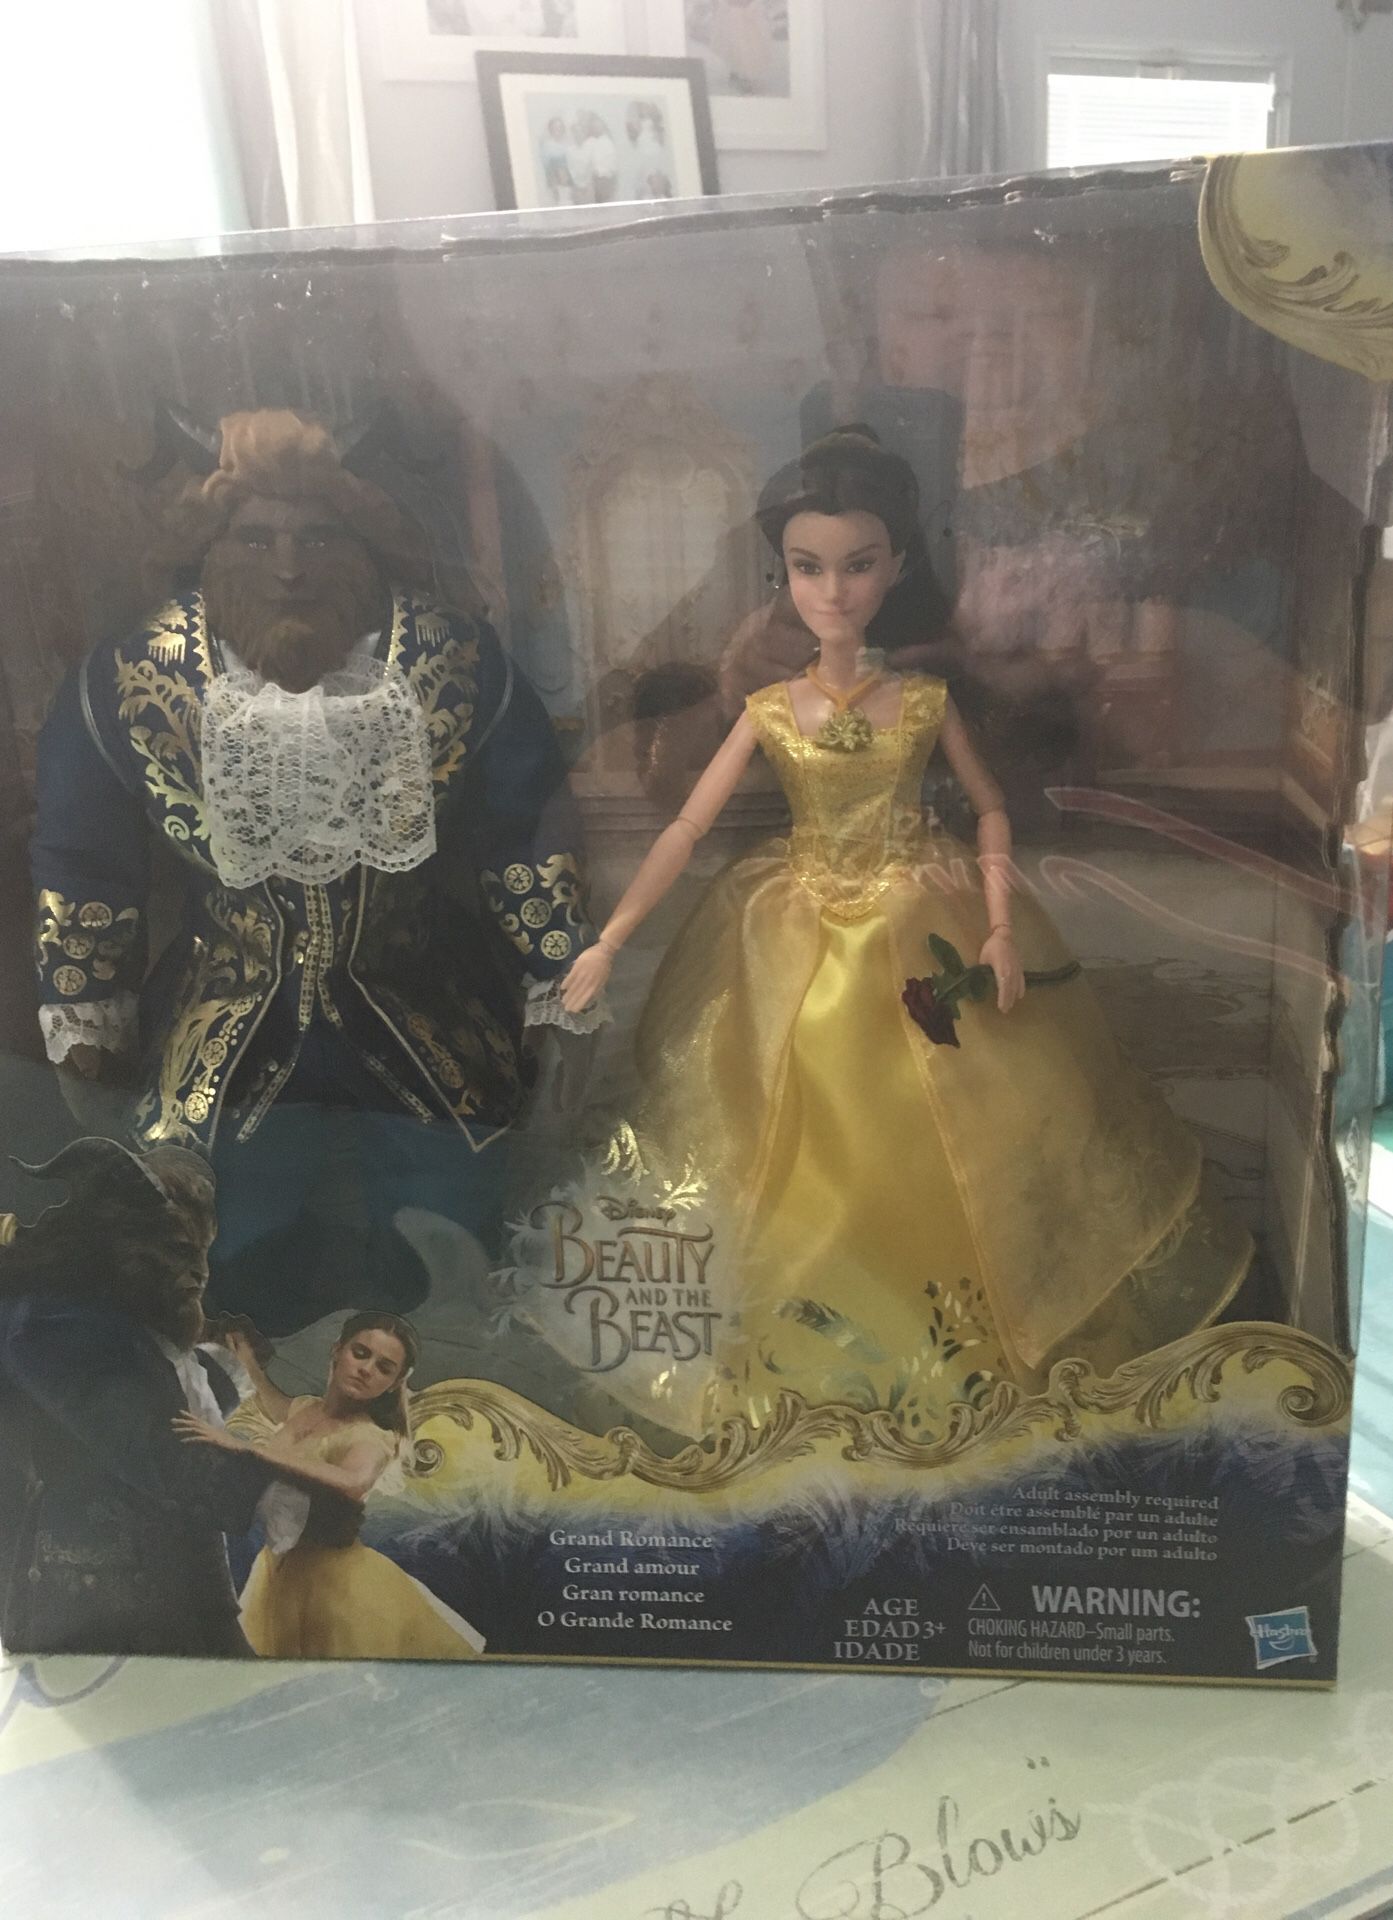 Beauty and the Beast collectors set